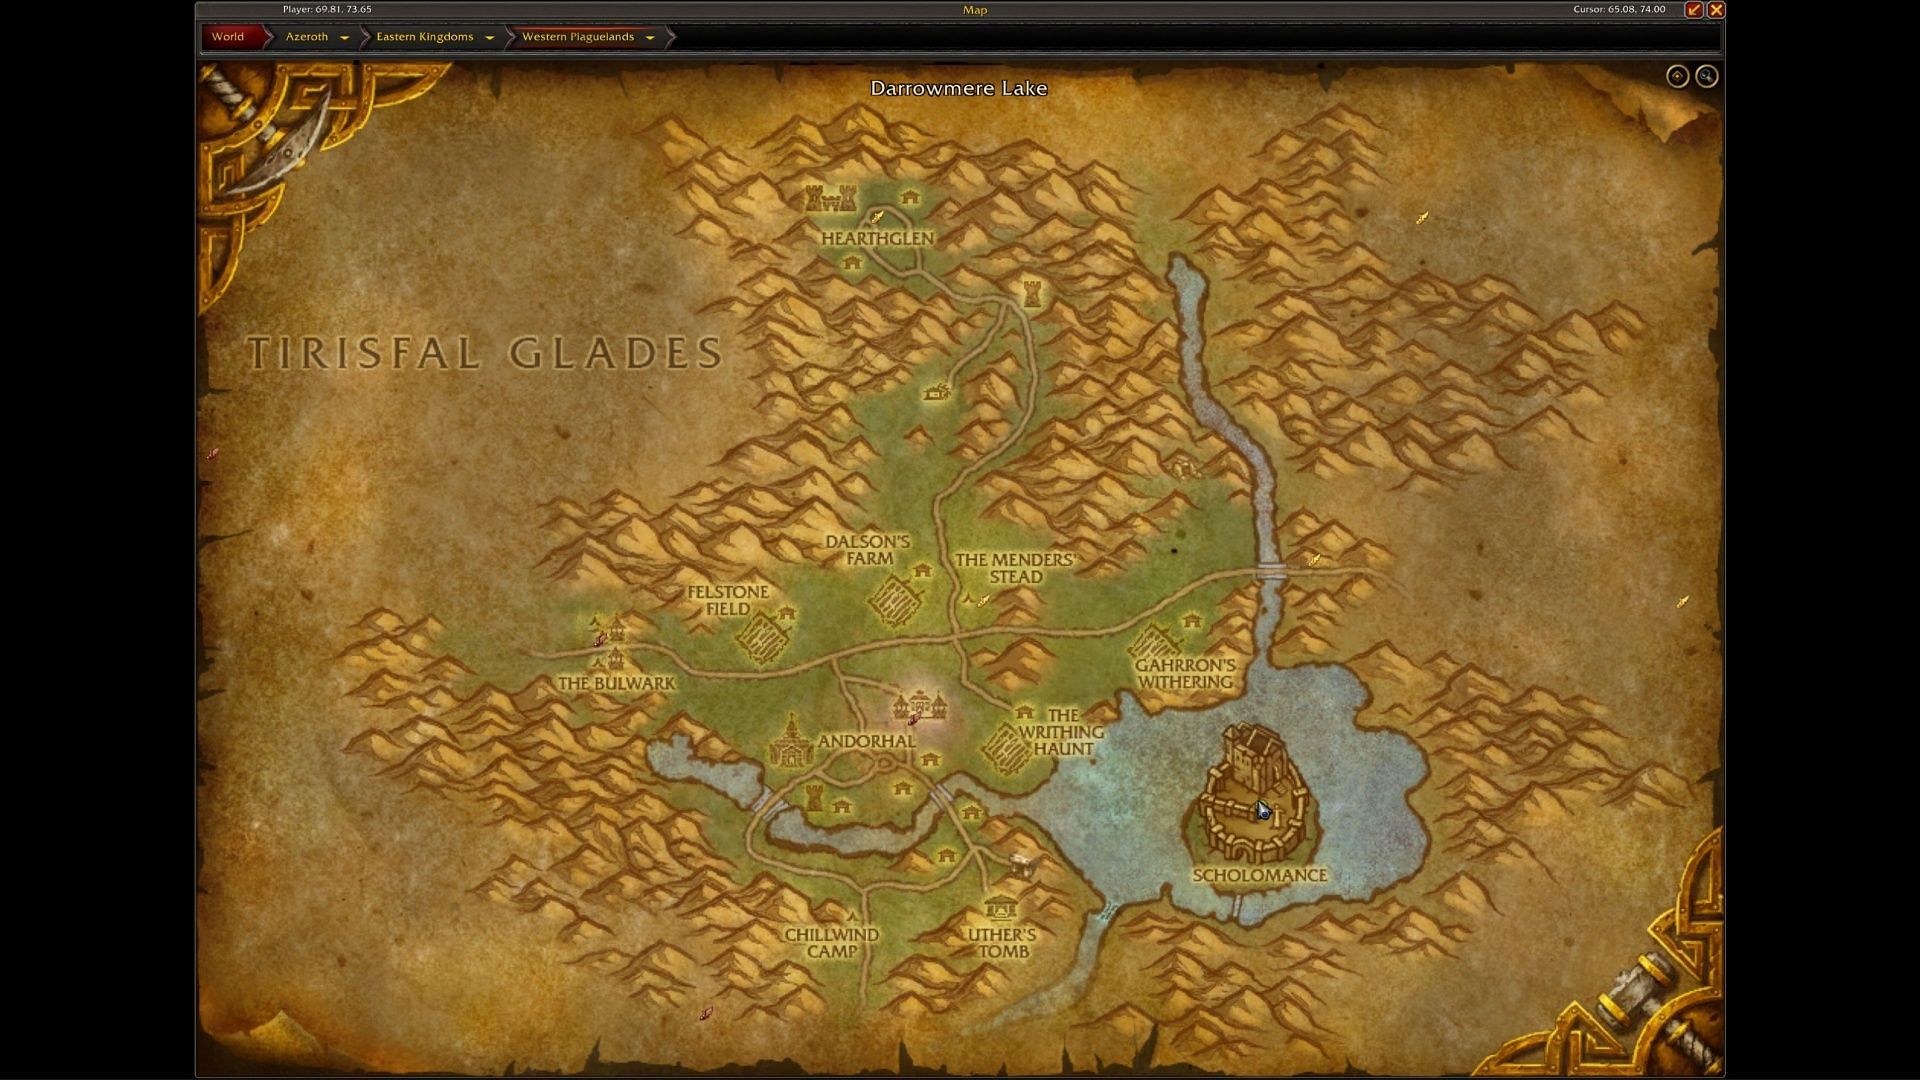 Scholomance is an easy place to find in World of Warcraft (Image via Blizzard Entertainment)